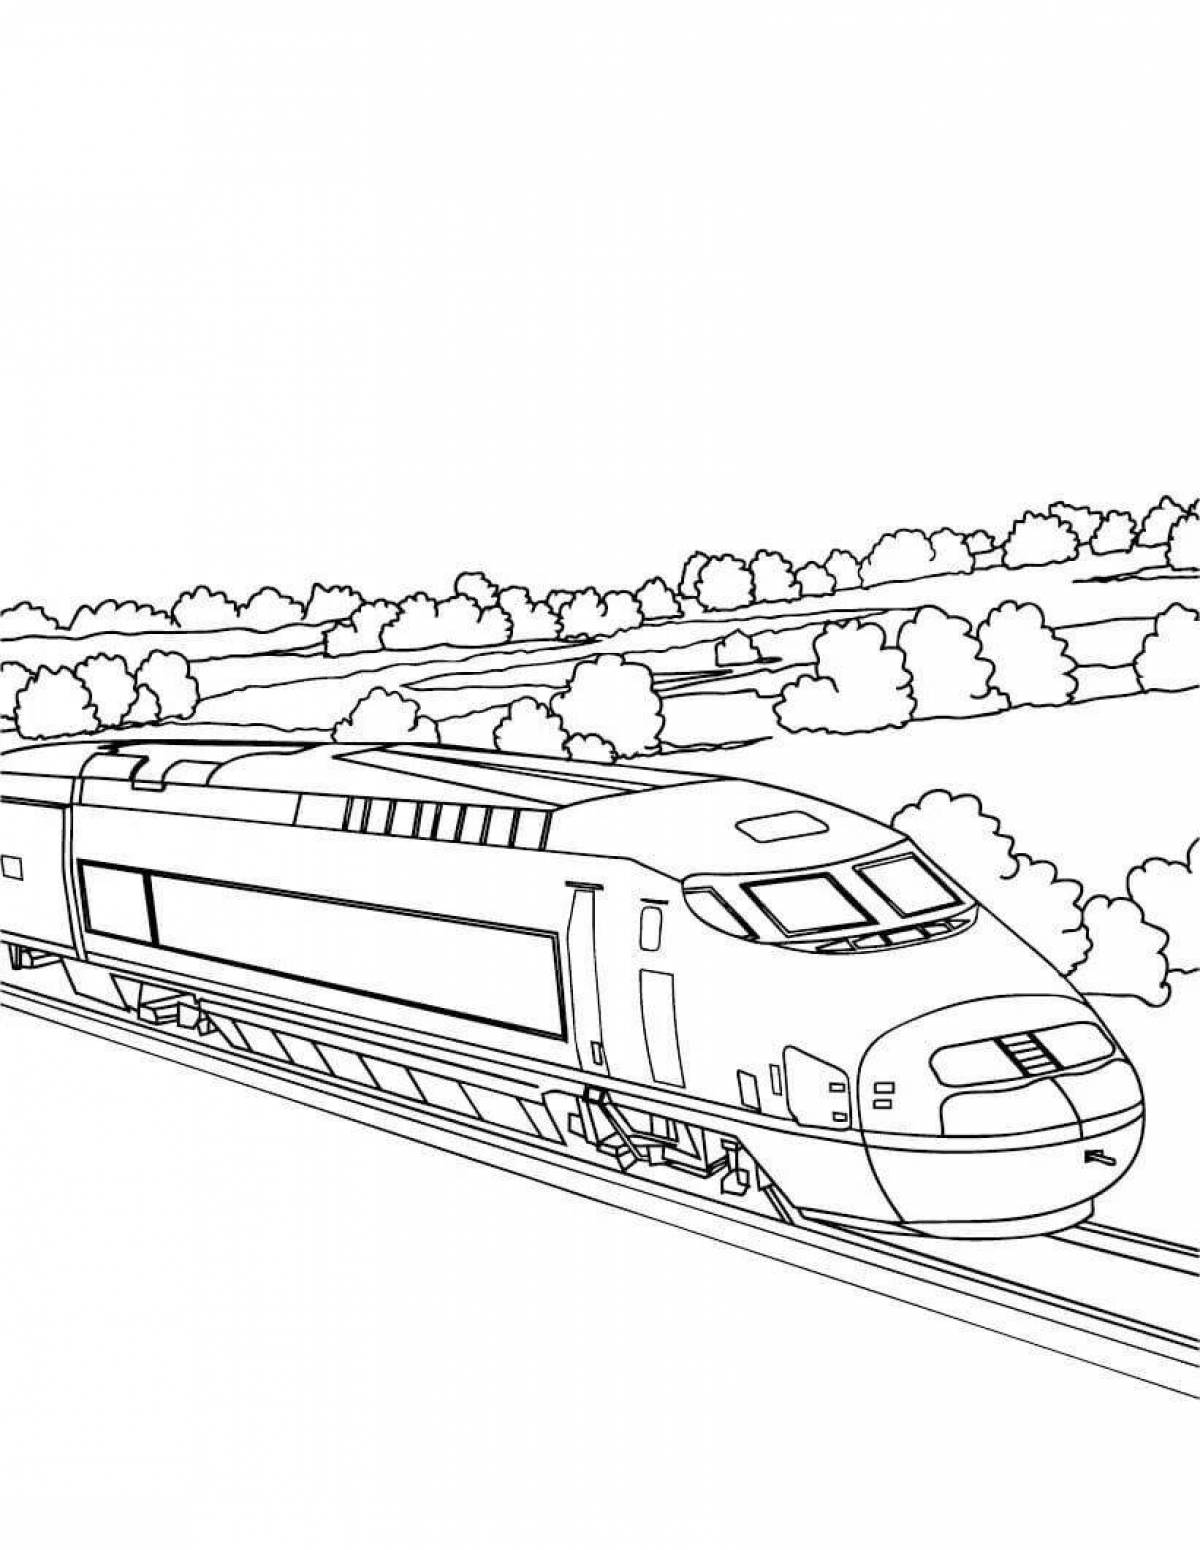 Coloring book shiny electric train